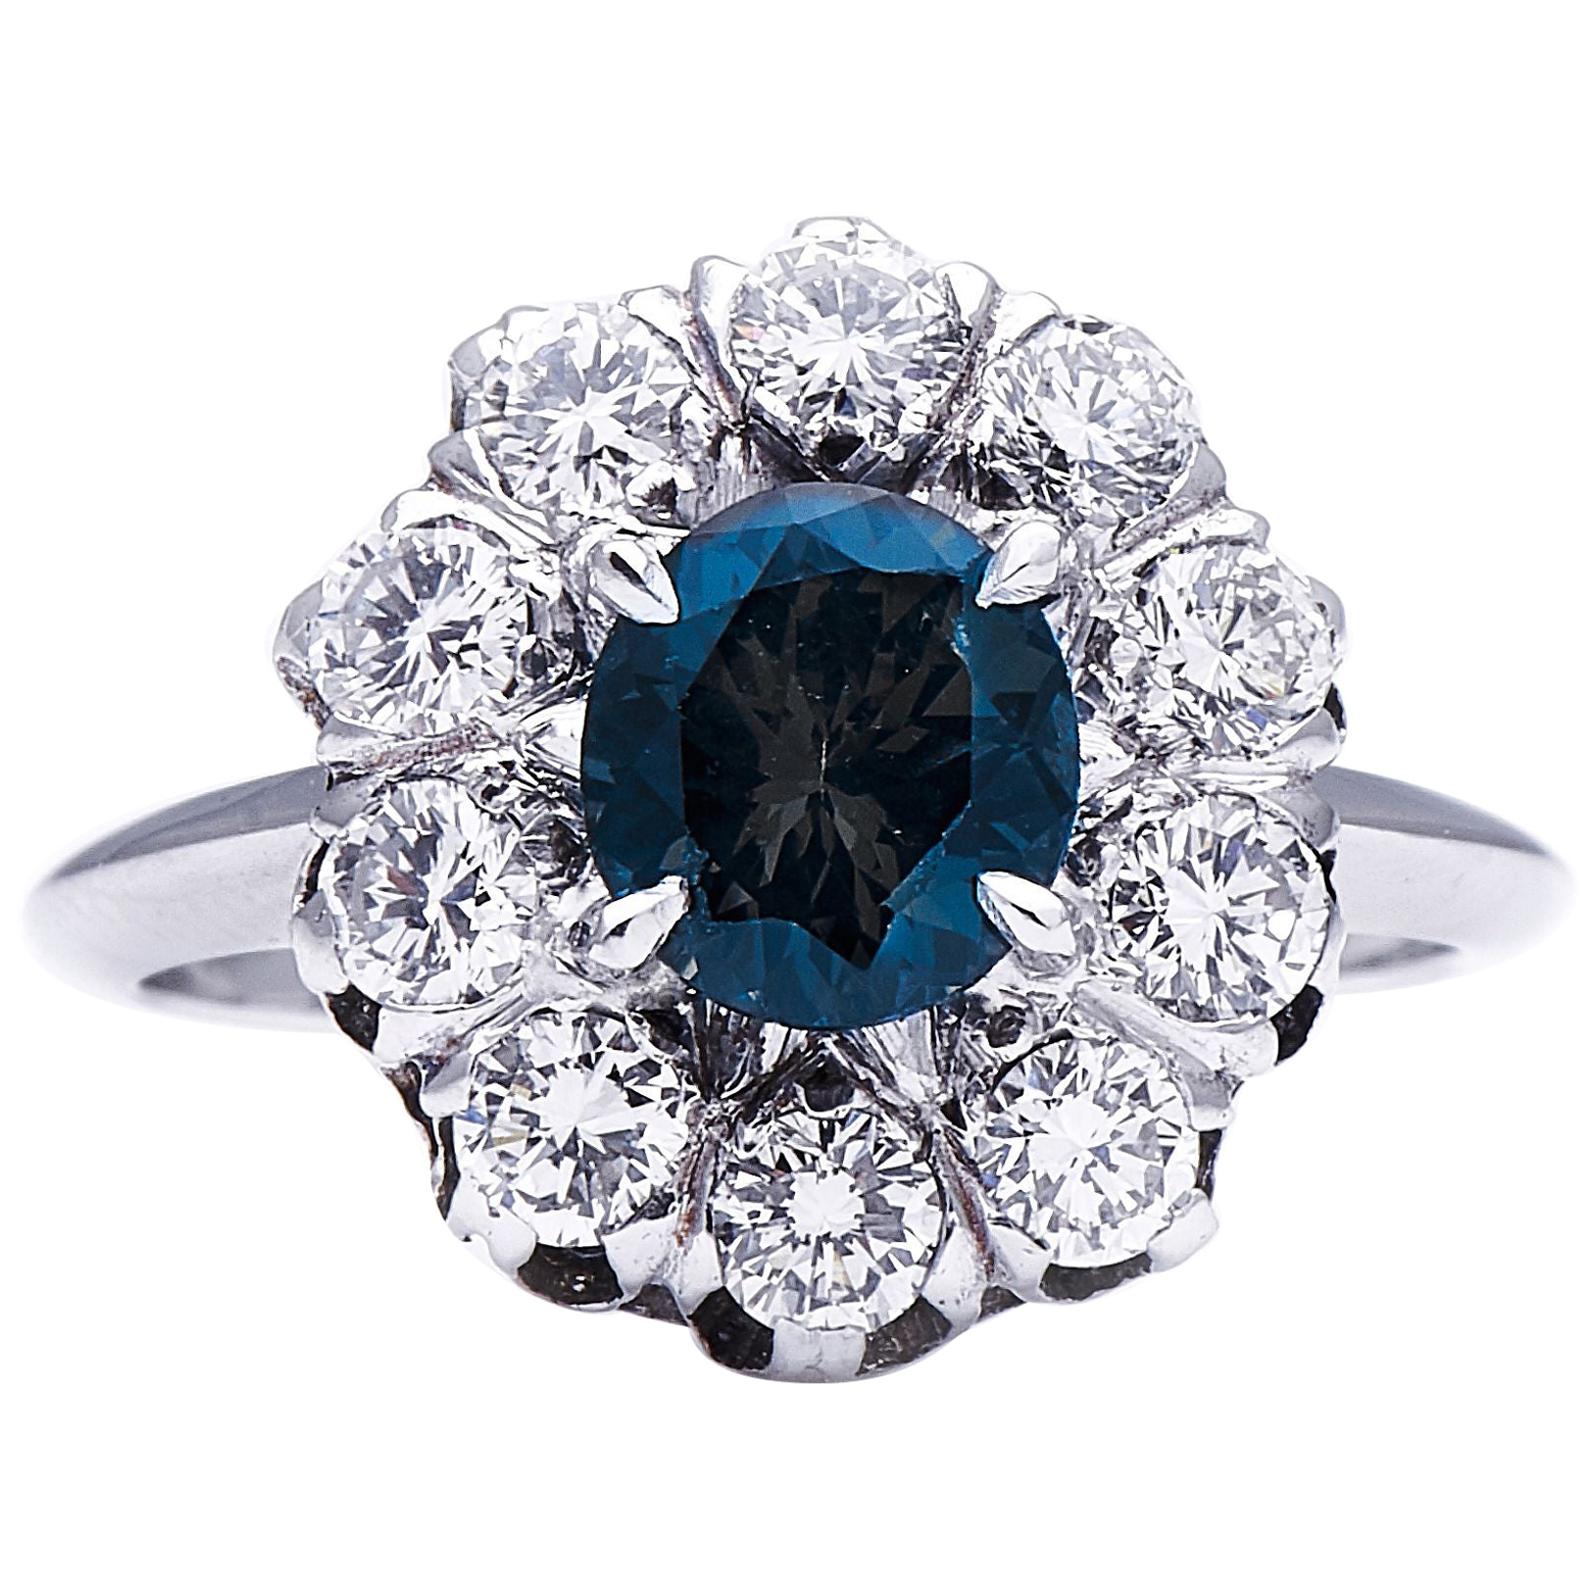 Antique Art Deco, French, 18 Carat White Gold, Cobalt Spinel and Sapphire Ring